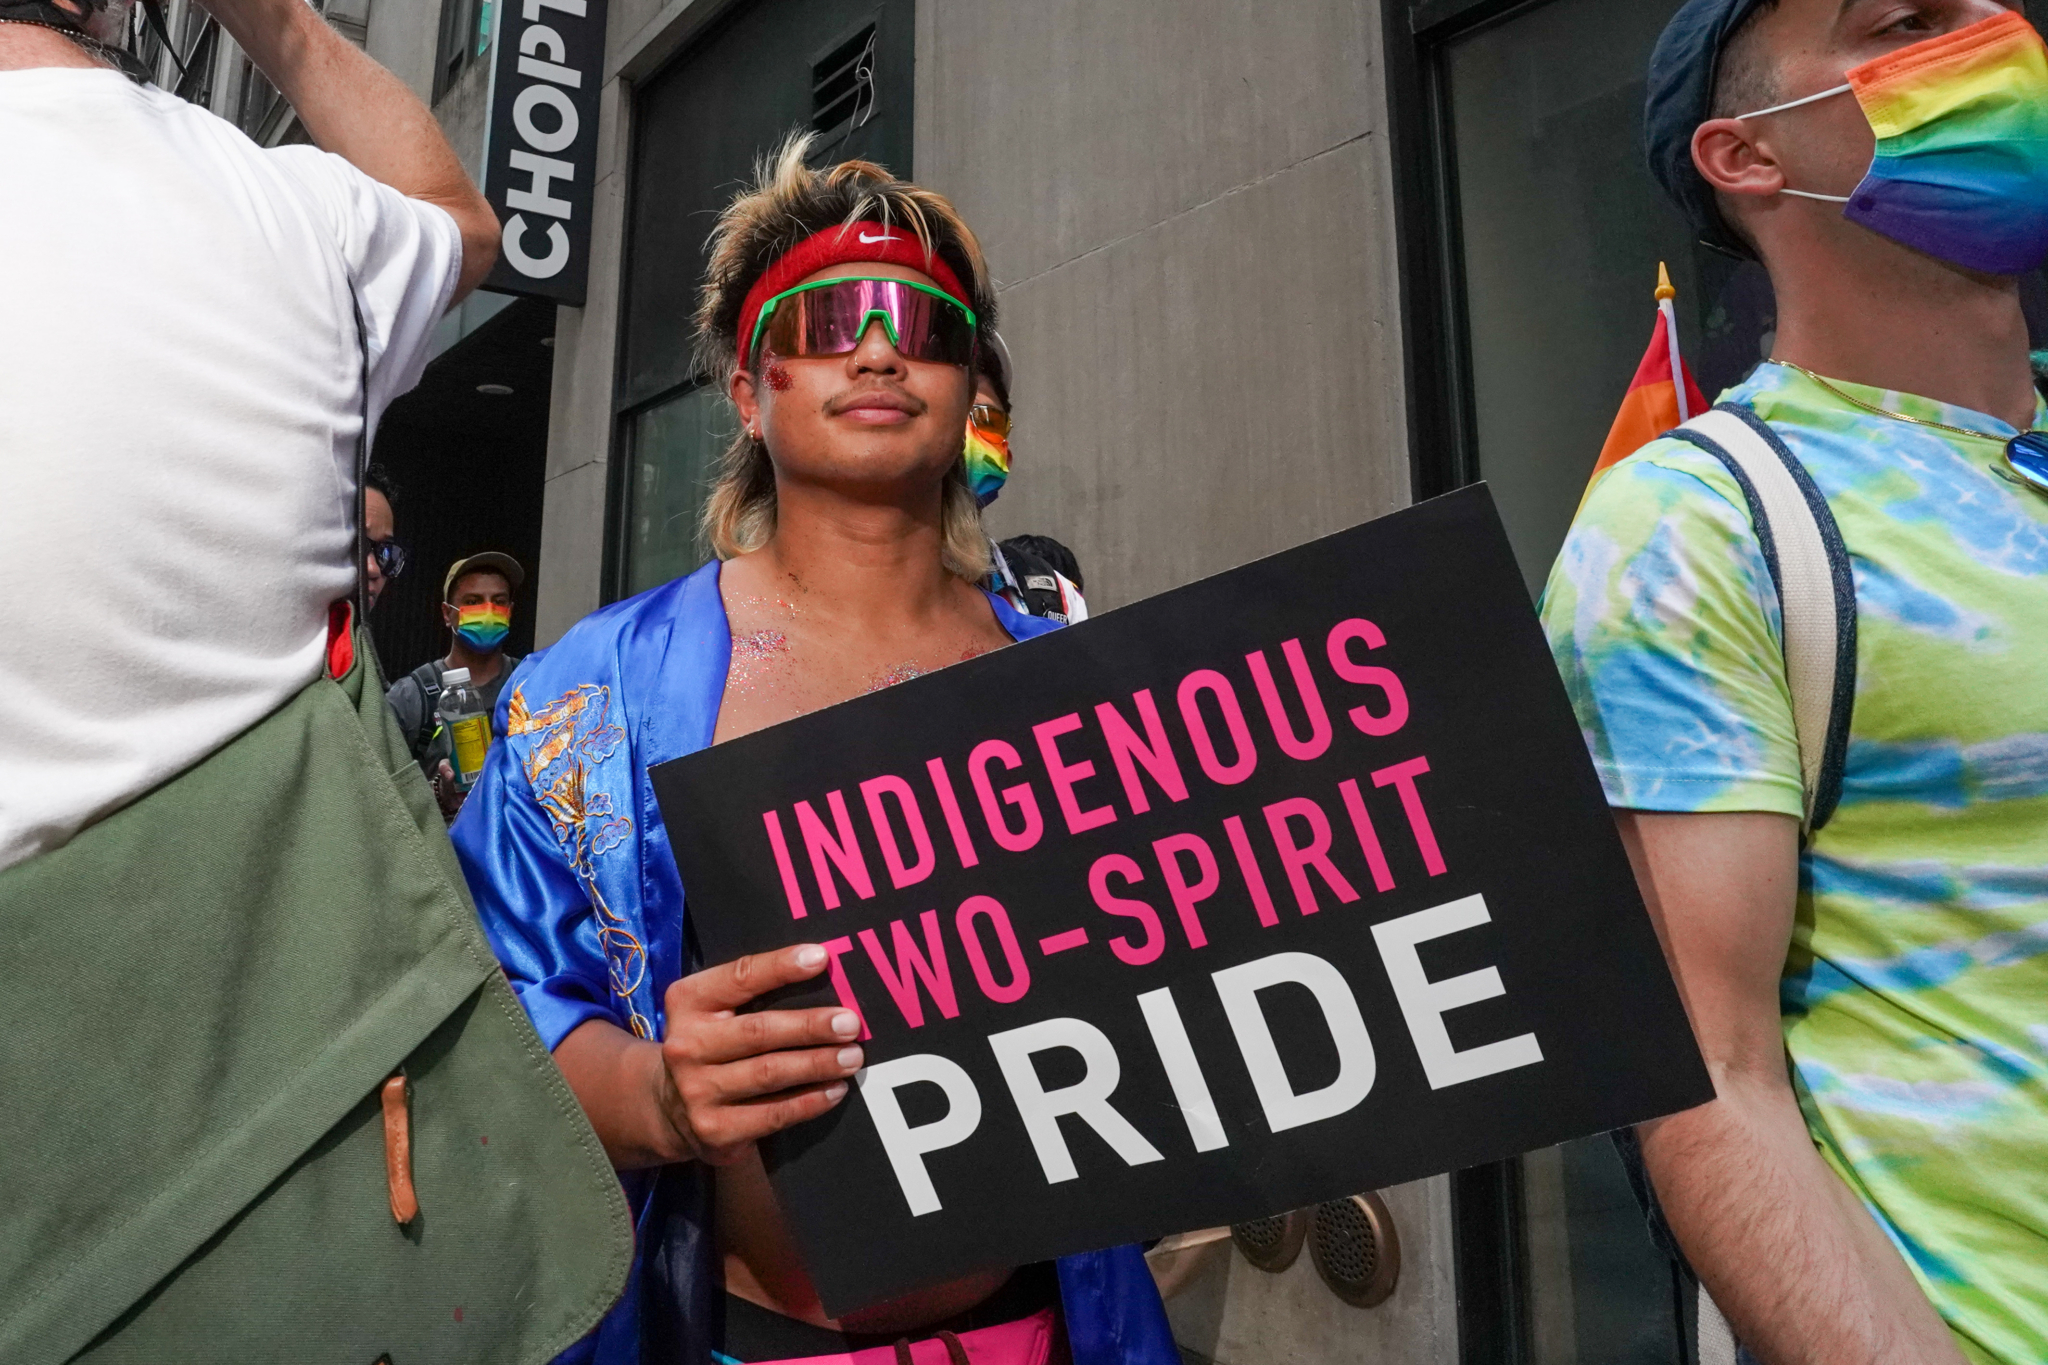  A person carries a sign that reads "Indigenous Two-Spirit Pride" during the Queer Liberation March on June 27, 2021, in New York City.  The Queer Liberation March is an alternative Pride celebration free of police officers and major corporate sponsors. (Photo by David Dee Delgado/Getty Images)